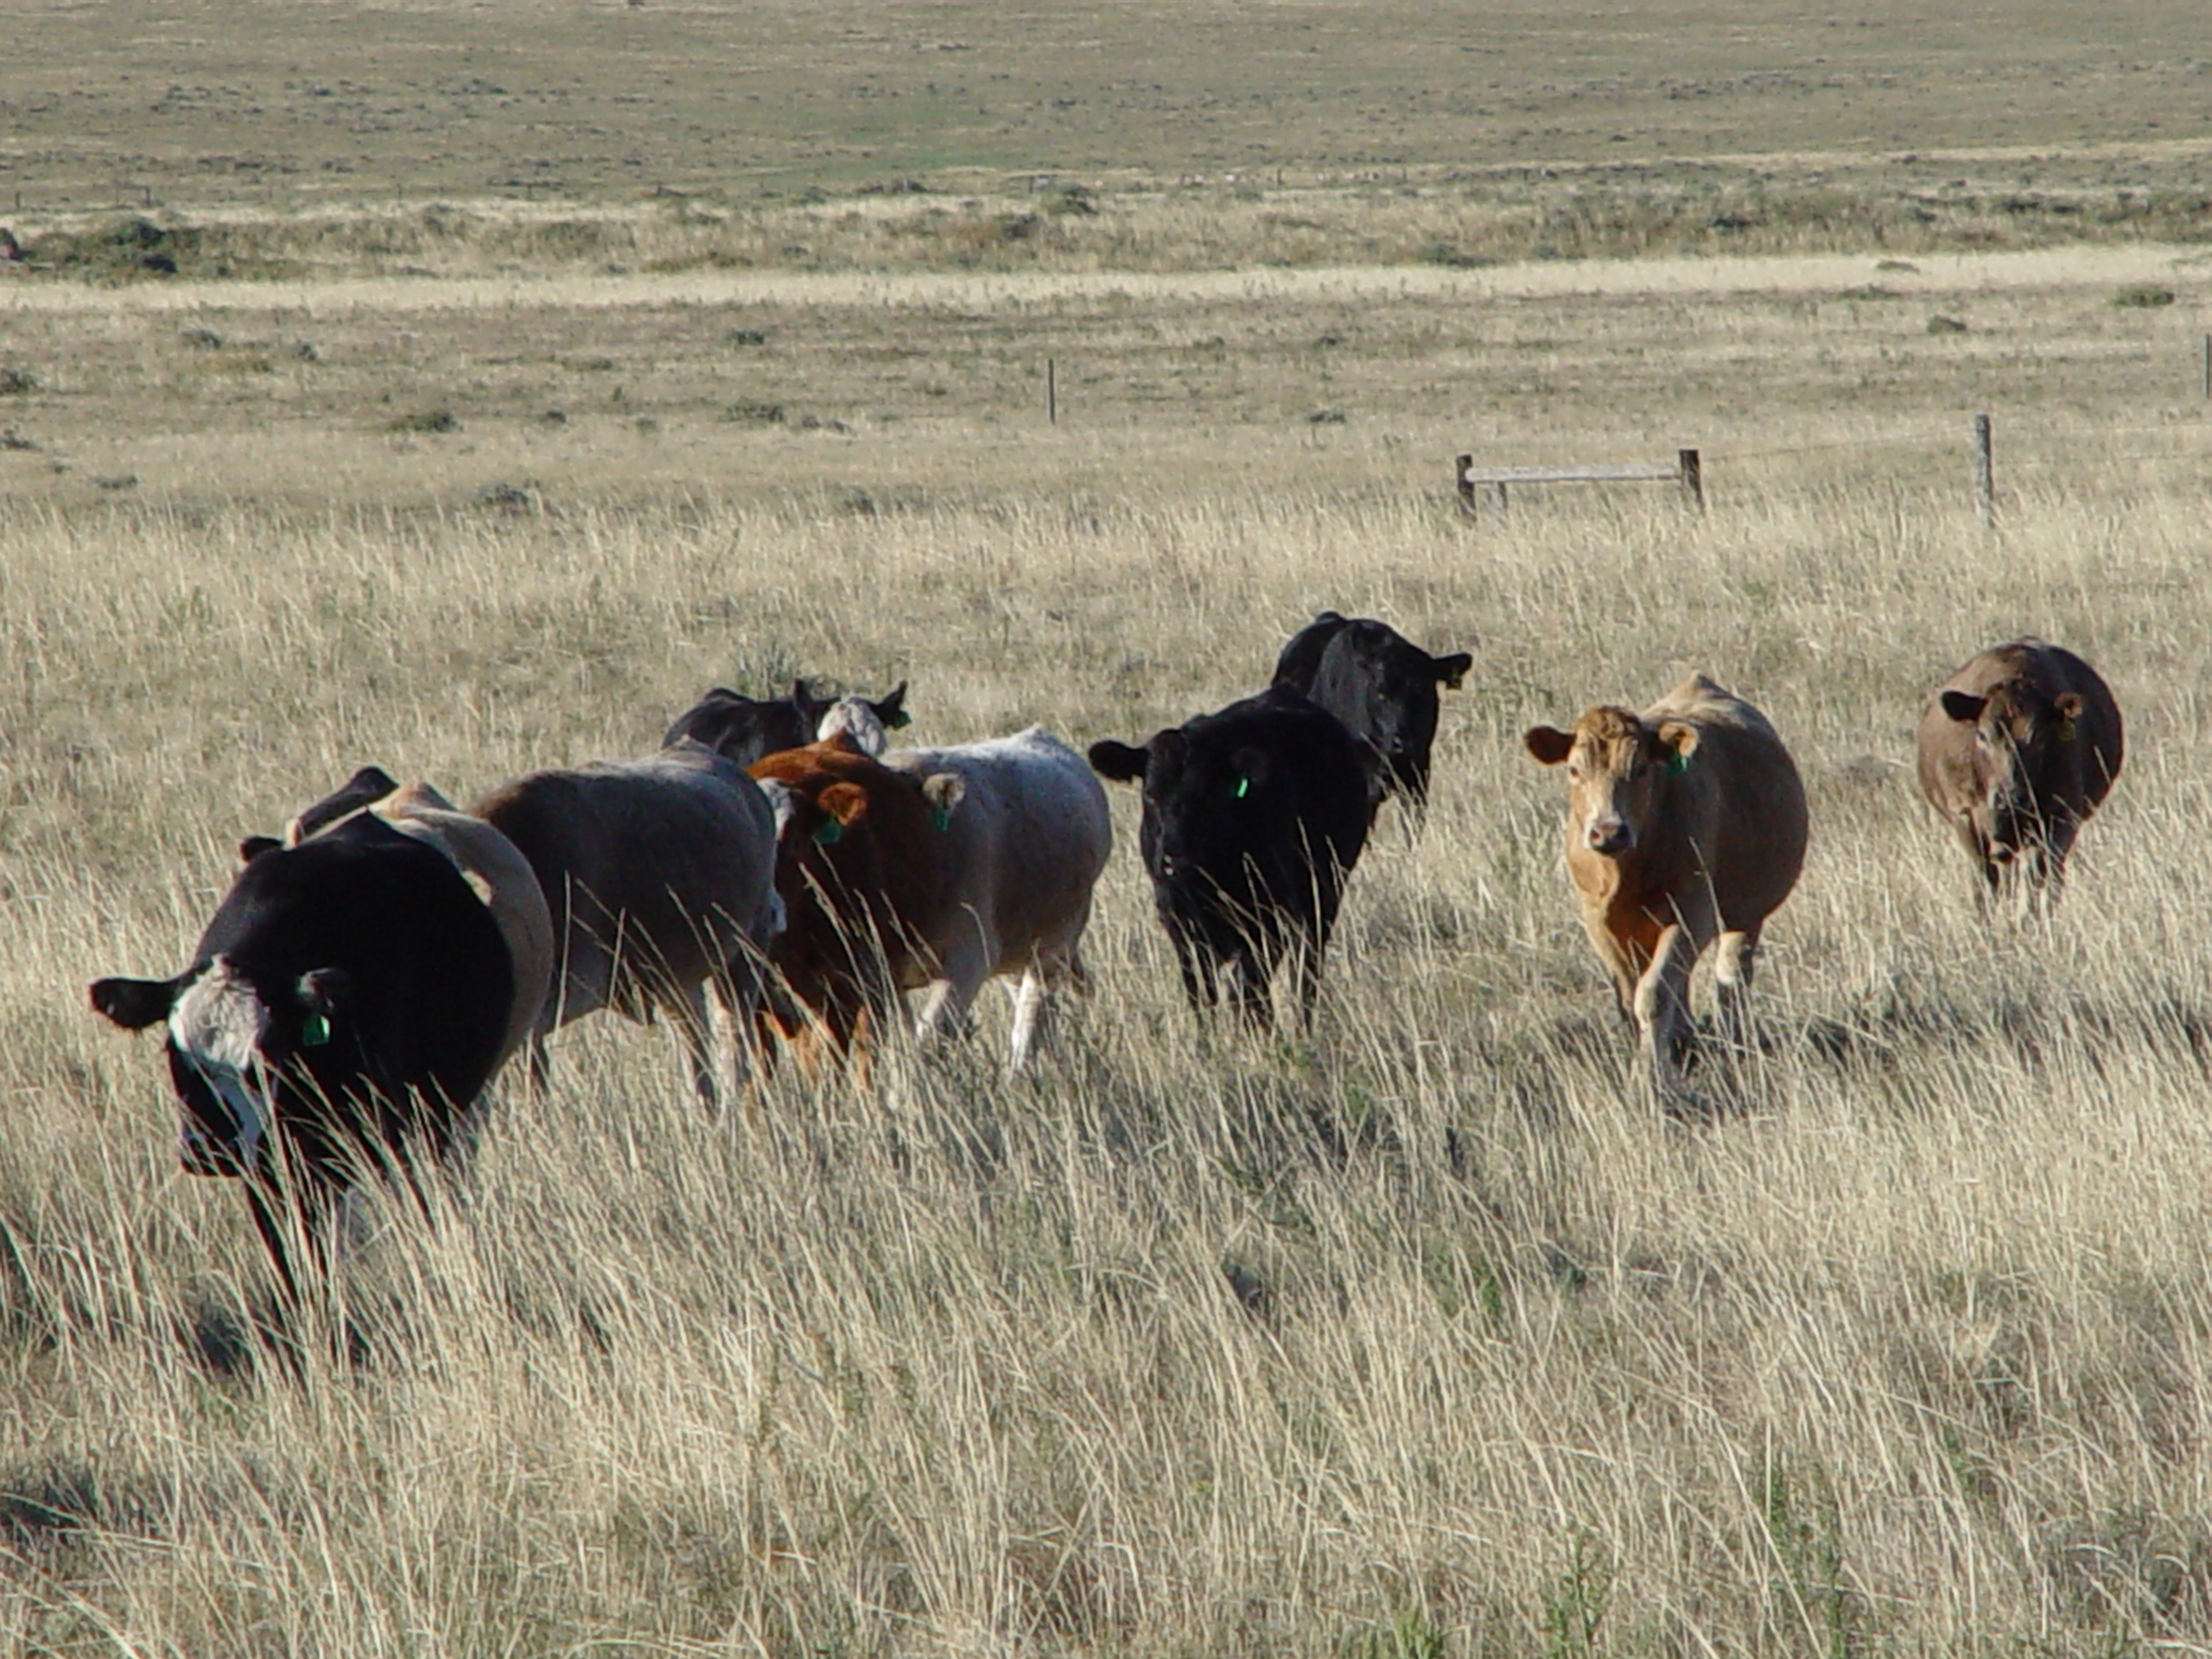 Will global warming require ranchers to rethink grazing? - Agri-Pulse